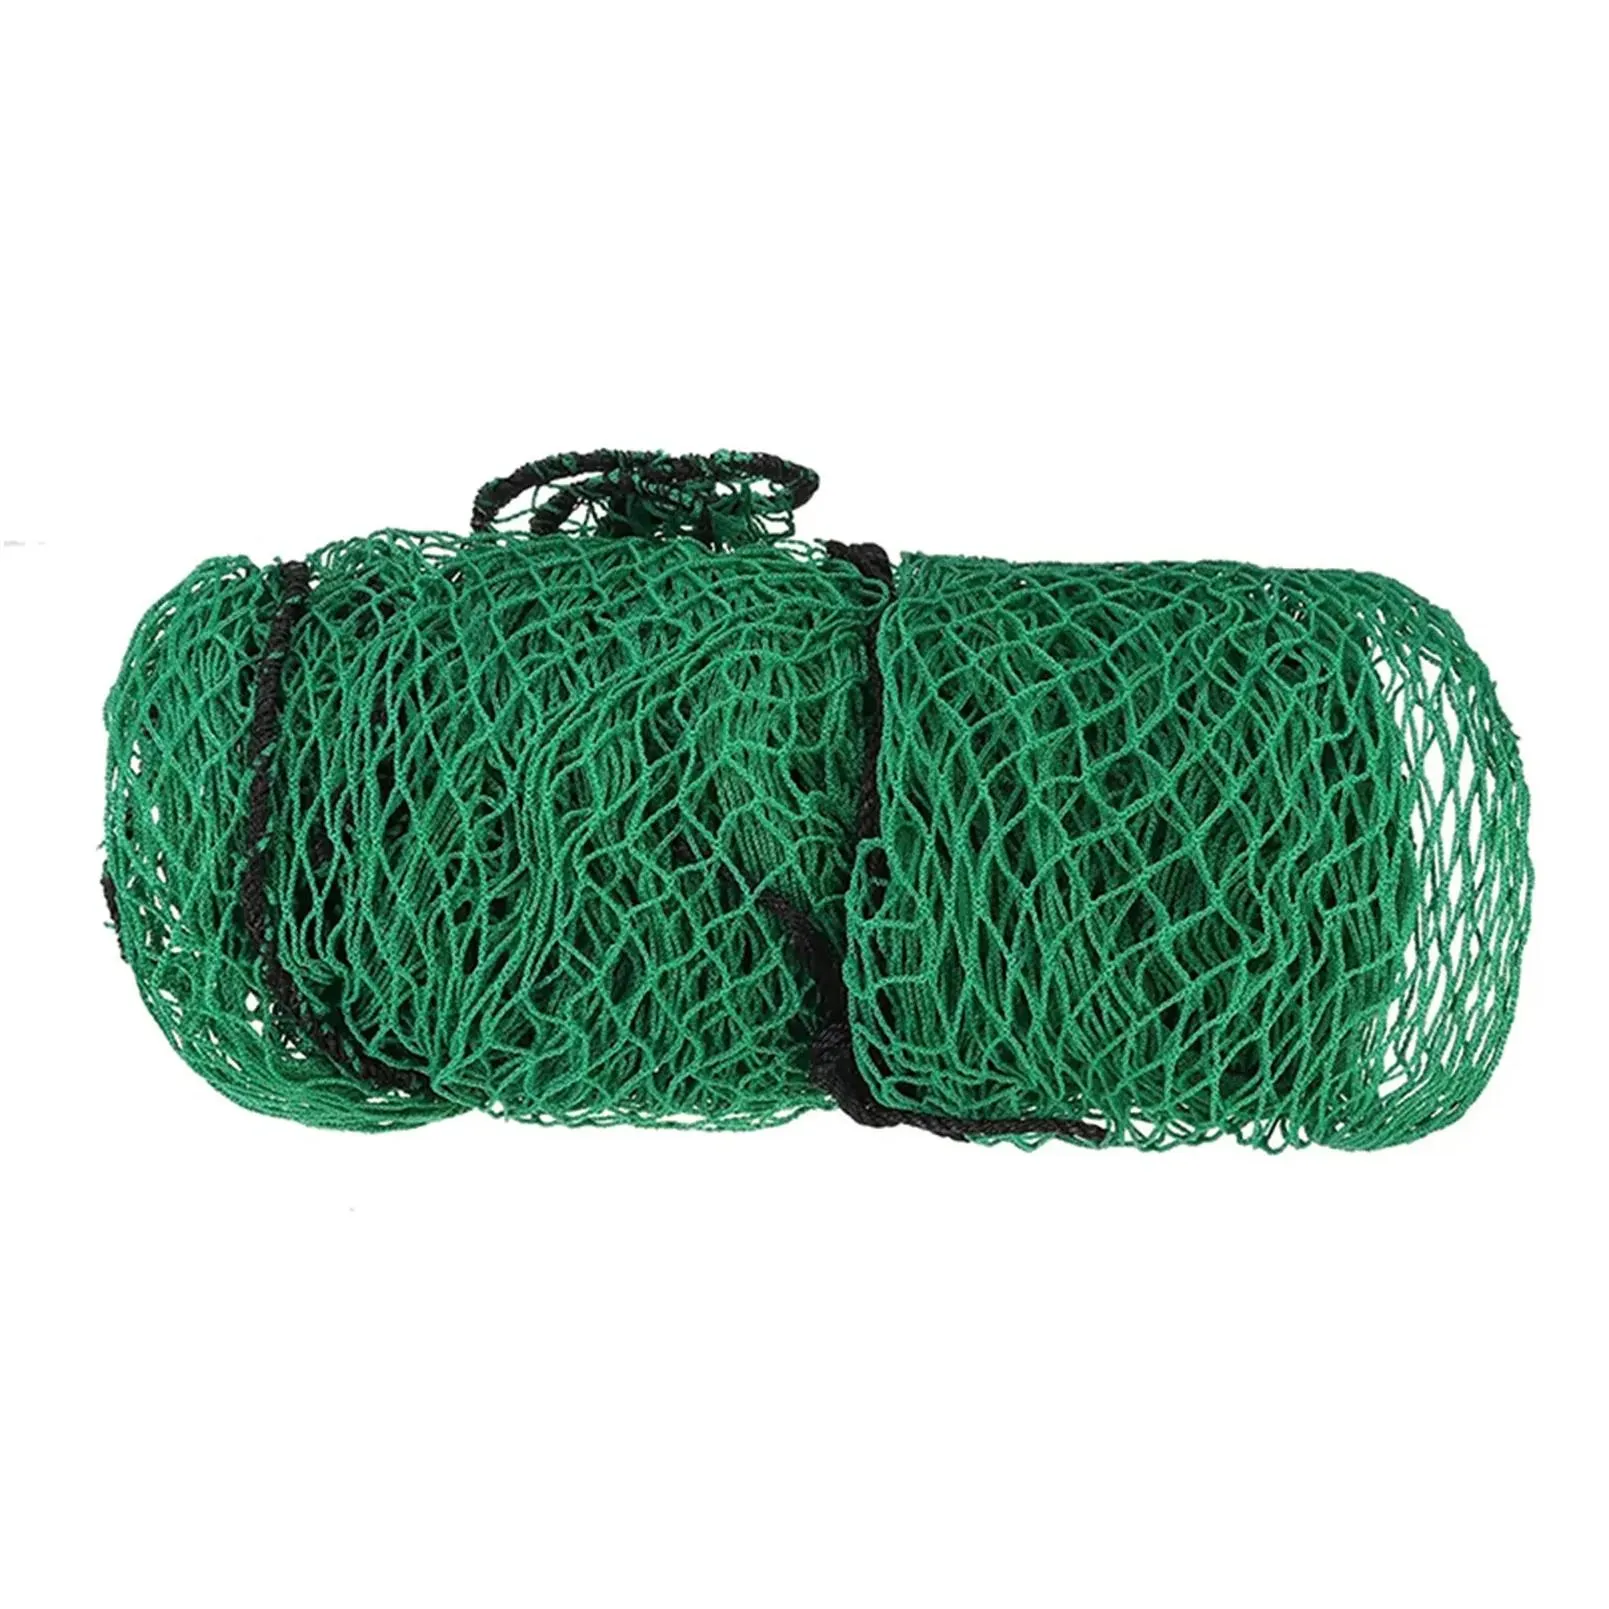 Aids Golf Practice Net Heavy Duty Durable Netting Rope Border Sports Barrier Training Mesh Golf Training Accessories 2x2m